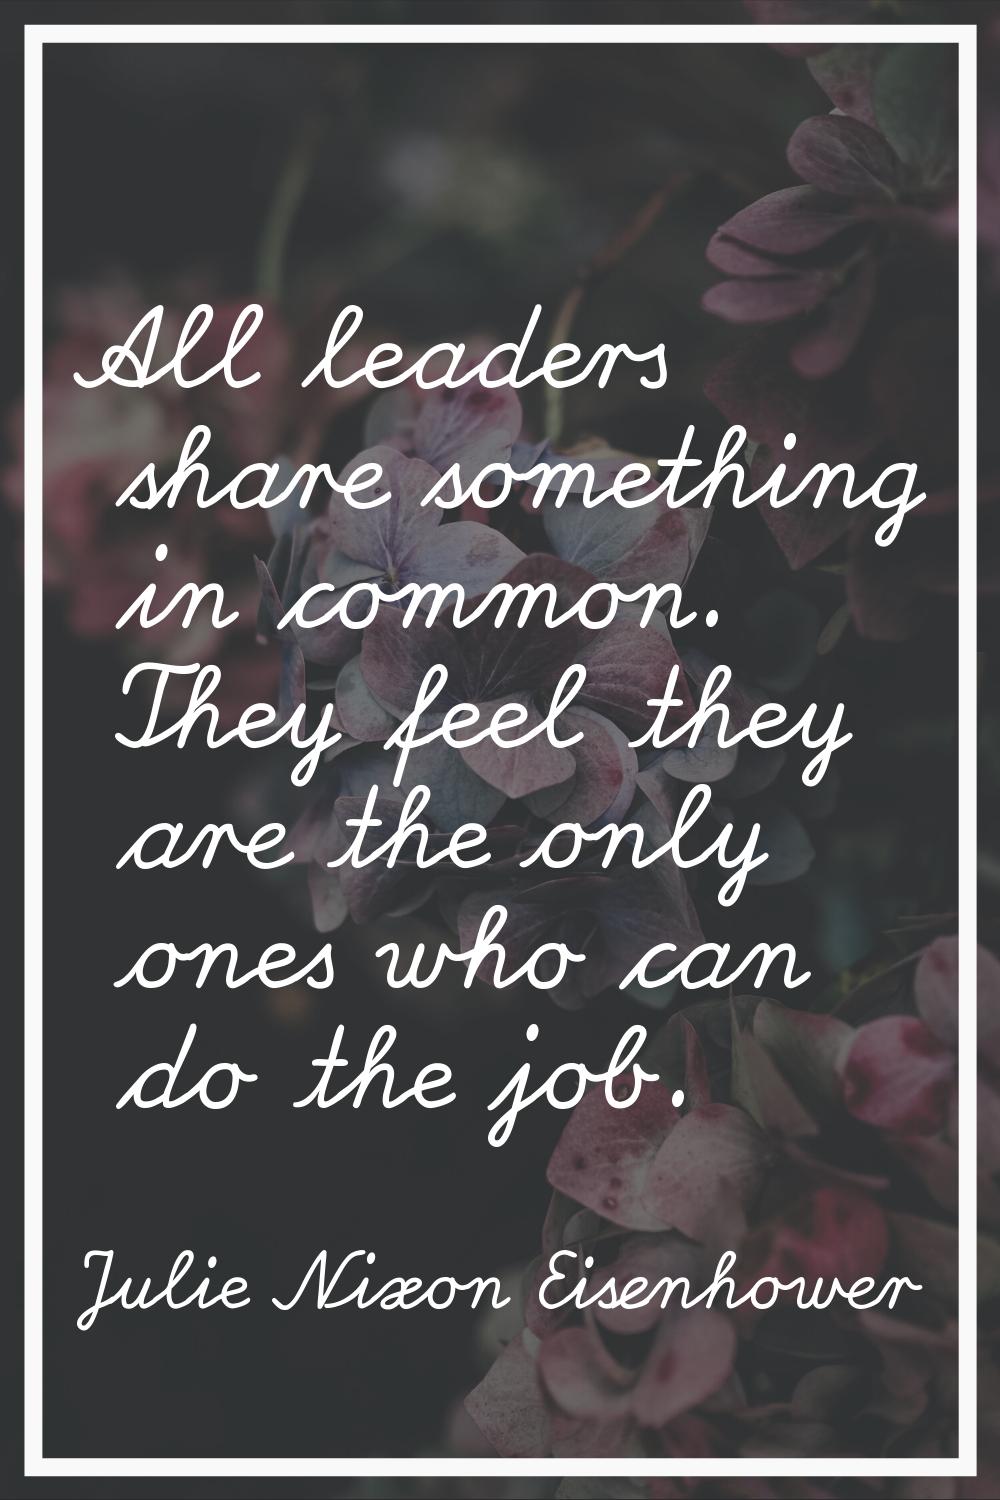 All leaders share something in common. They feel they are the only ones who can do the job.